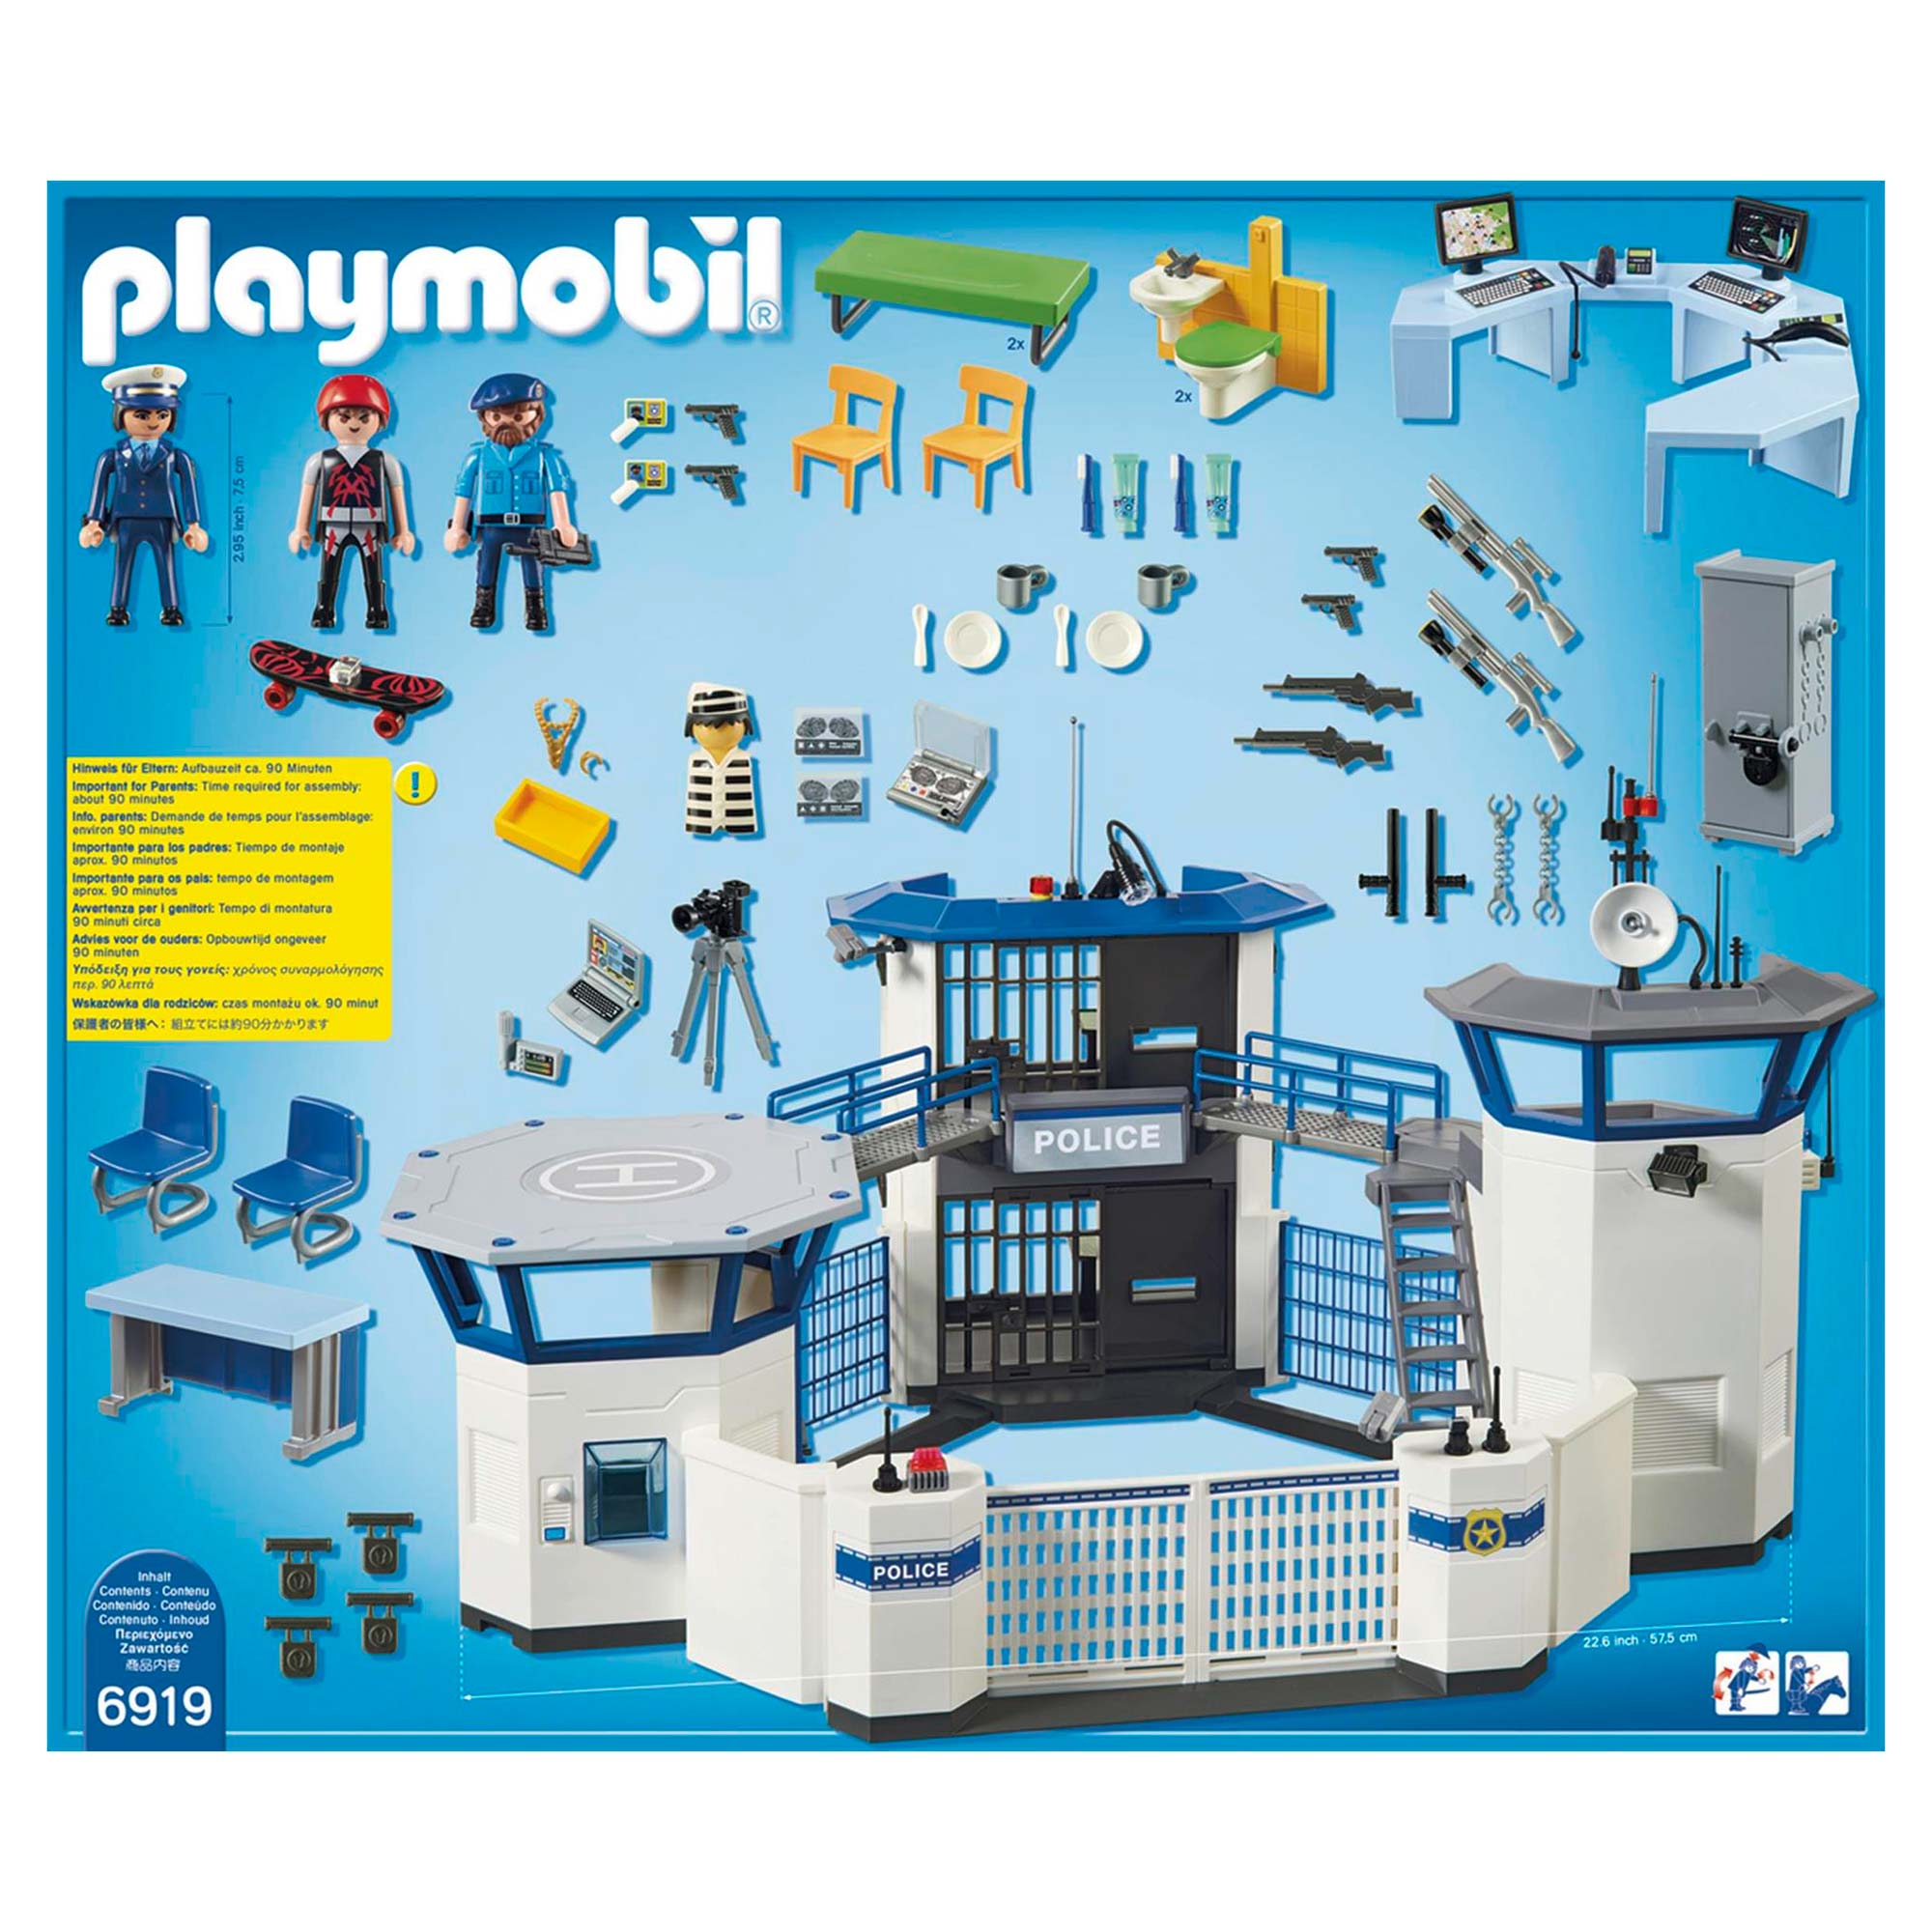 Playmobil 6919 City Action Police Headquarters with Prison at Toys